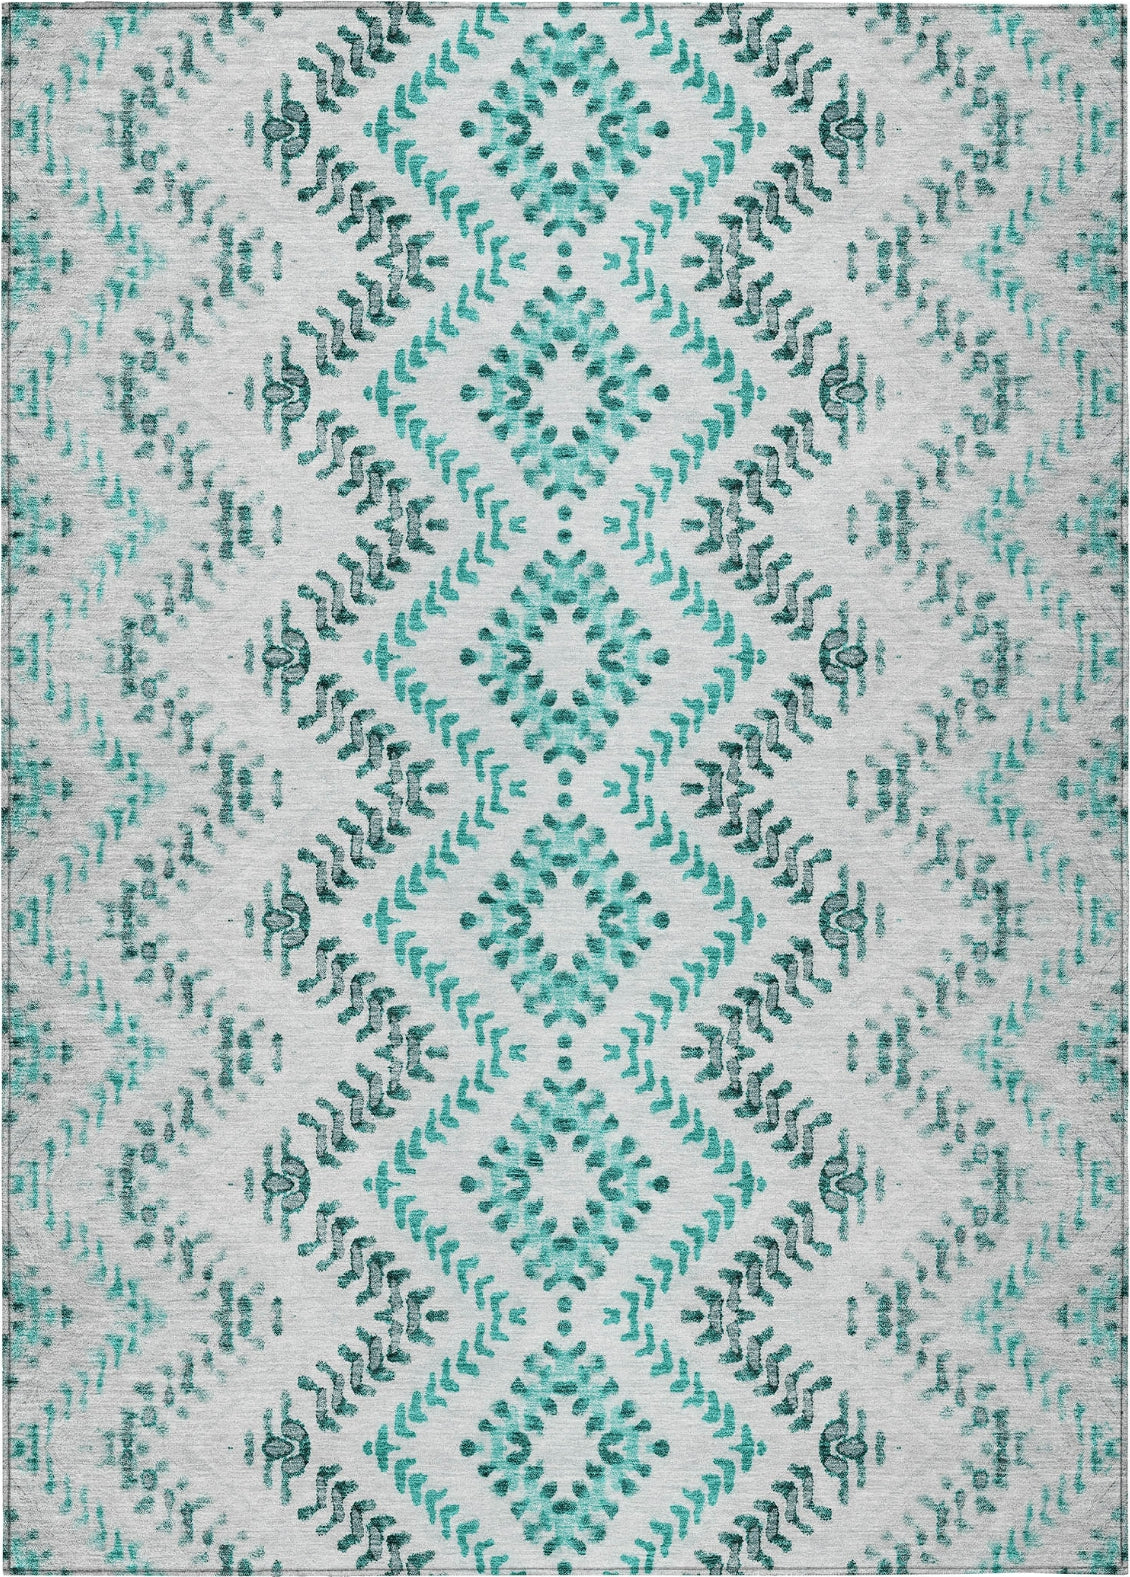 Piper Looms Chantille Geometric ACN684 Teal Area Rug